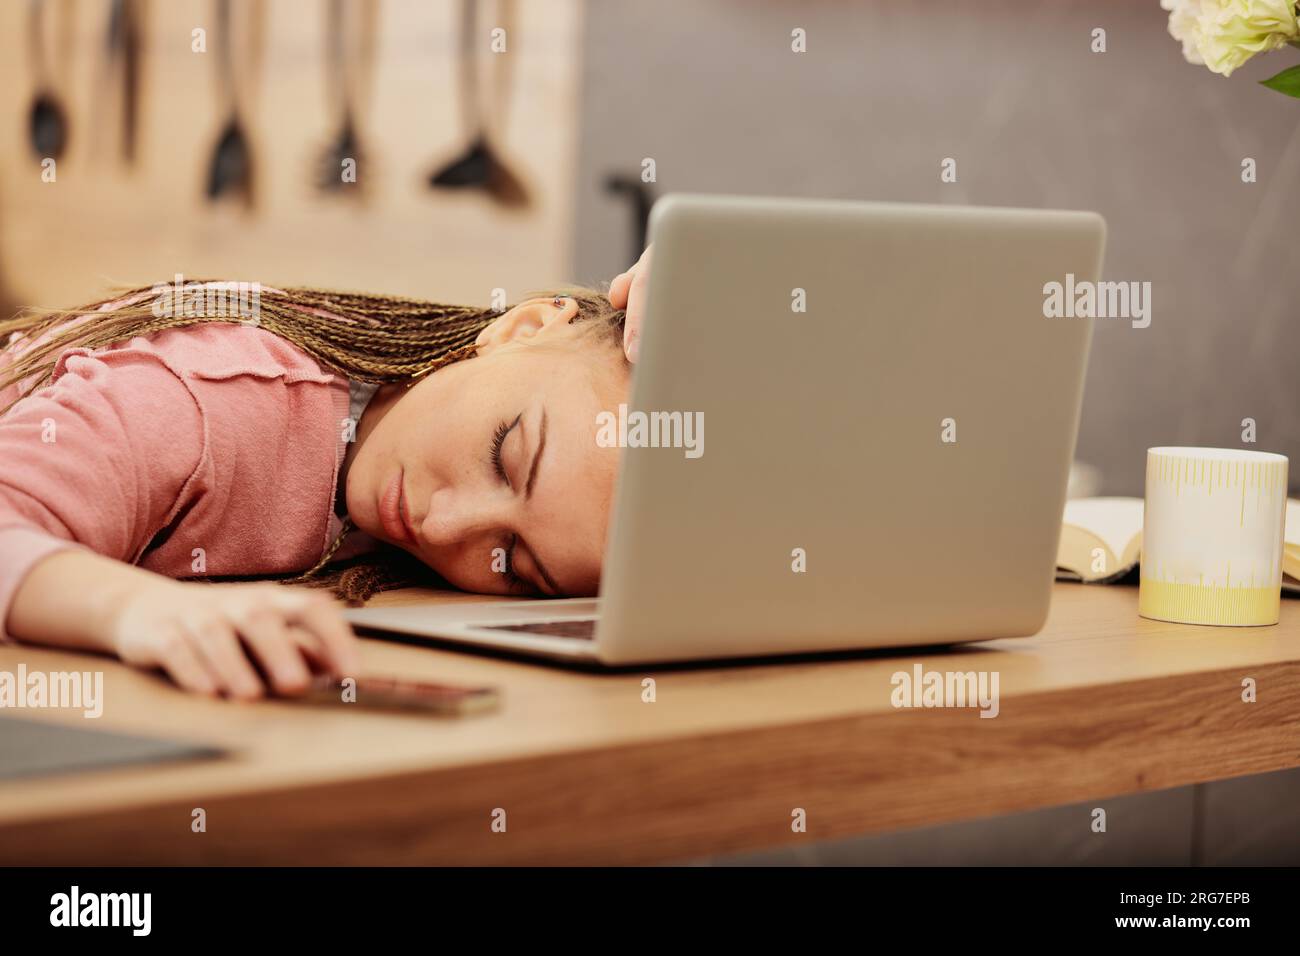 Asleep on her laptop in the kitchen, a tired woman with box-braids rests after hard work or study Stock Photo